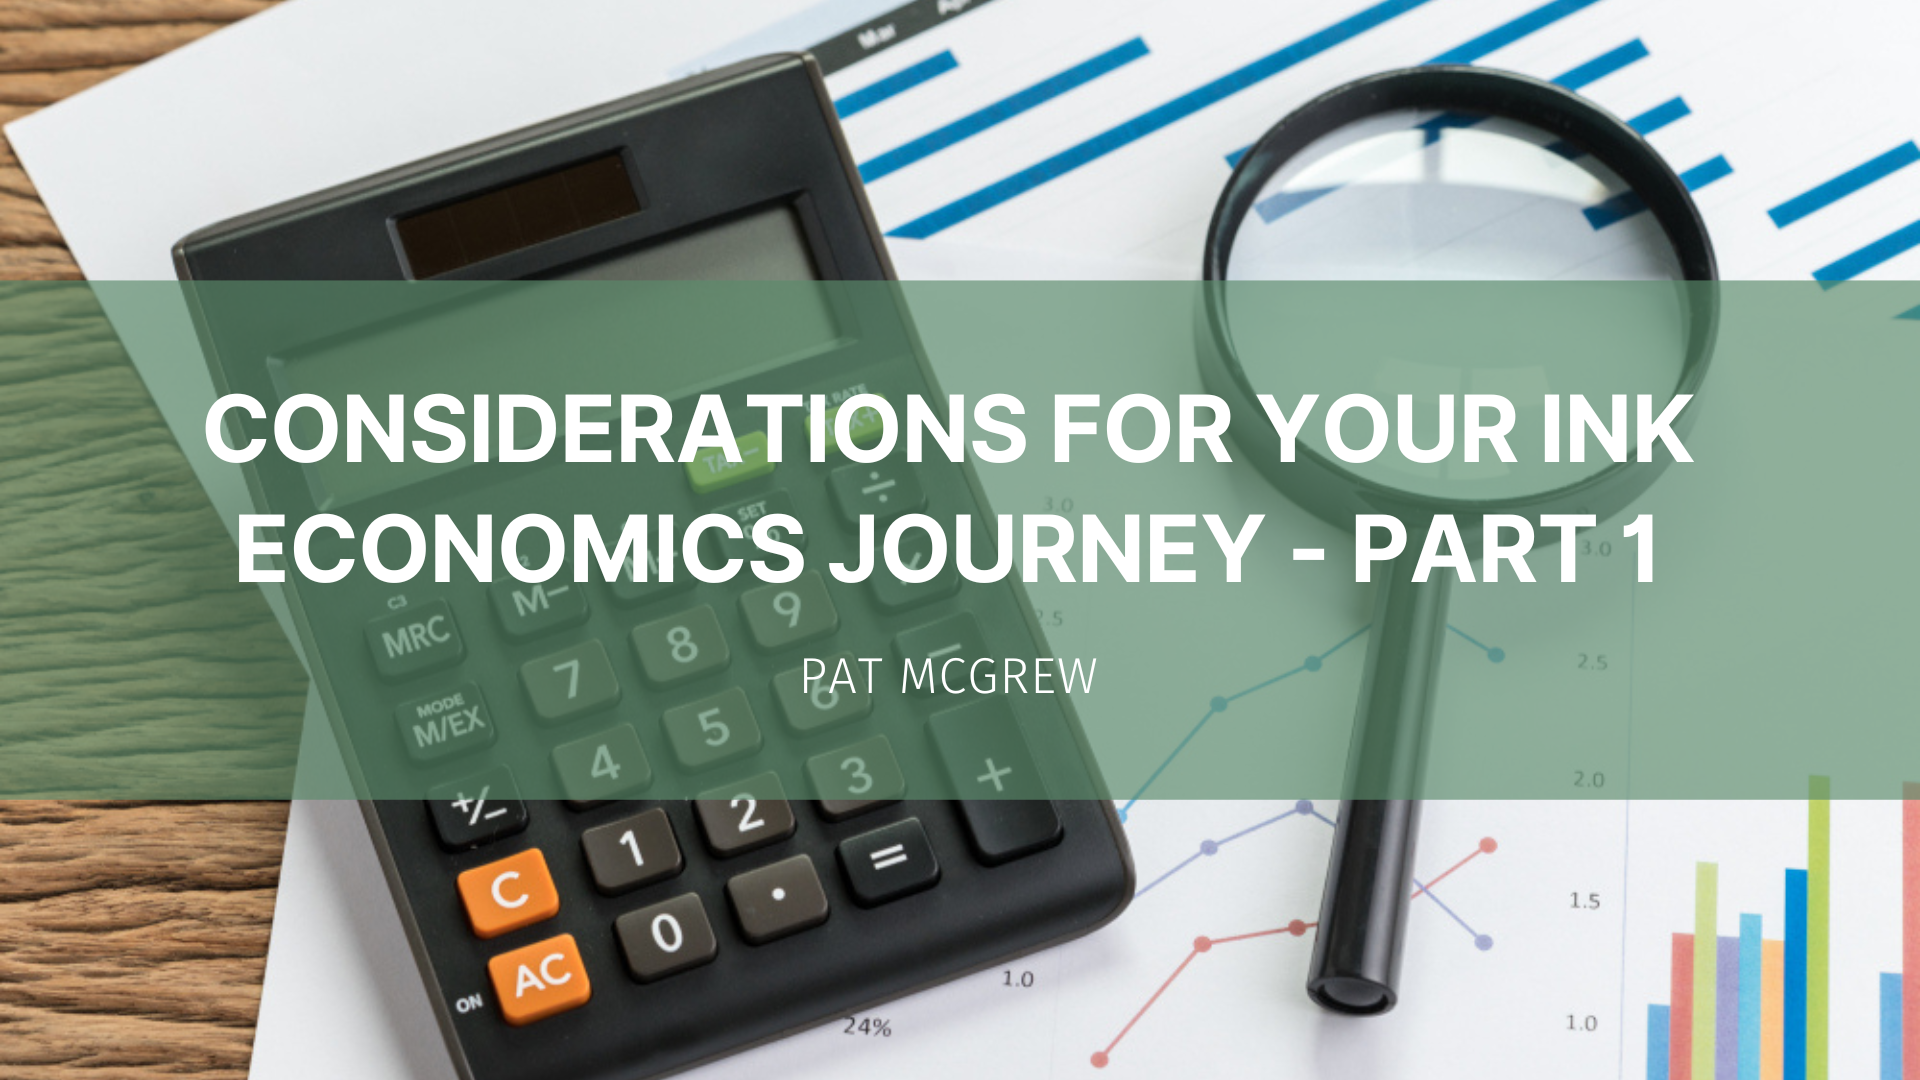 Featured image for “Considerations for Your Ink Economics Journey – Part 1”